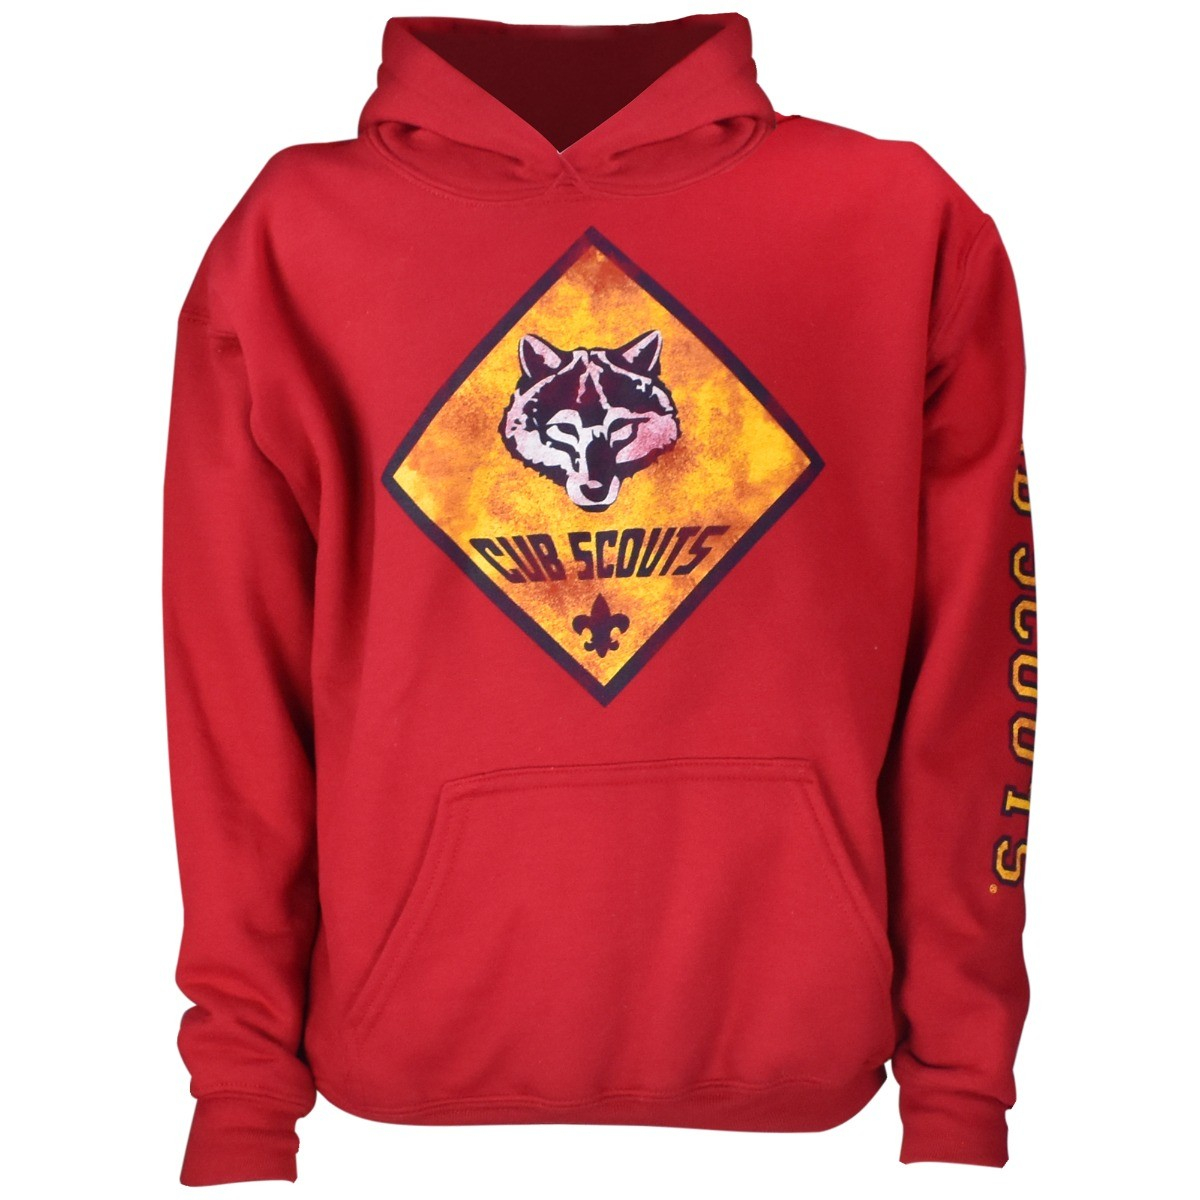 Beaver Scout Sweatshirt Official Product 